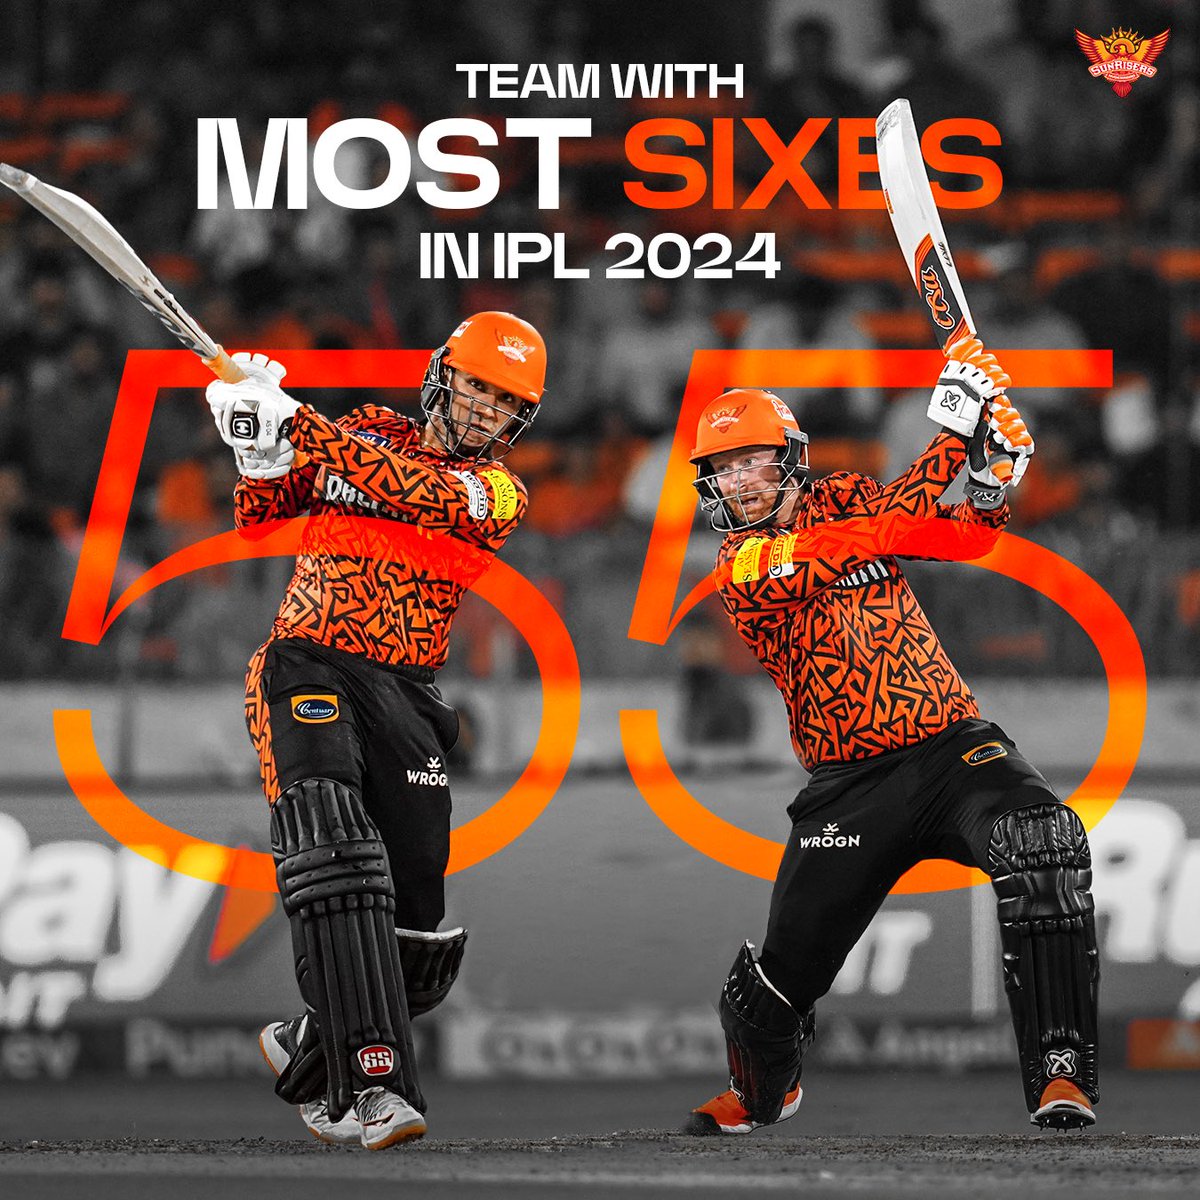 Architects of destruction 🥵 We’ve hit the most 6️⃣s in #IPL2024 so far! Let’s keep it going 🔥